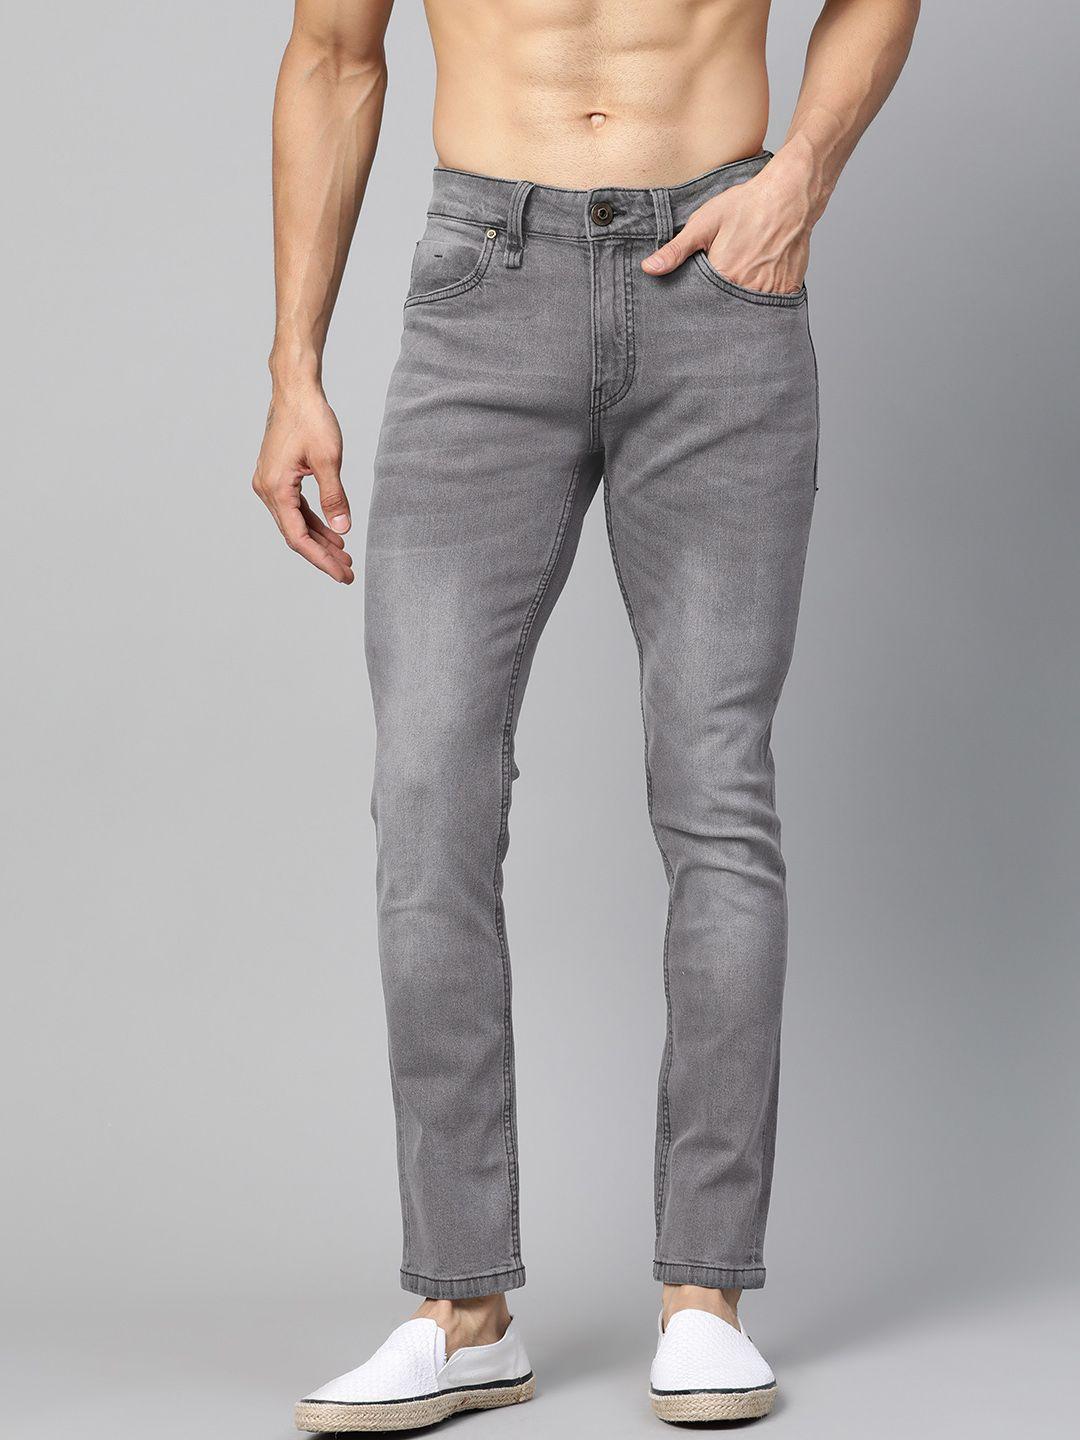 roadster-men-grey-skinny-fit-mid-rise-clean-look-stretchable-jeans